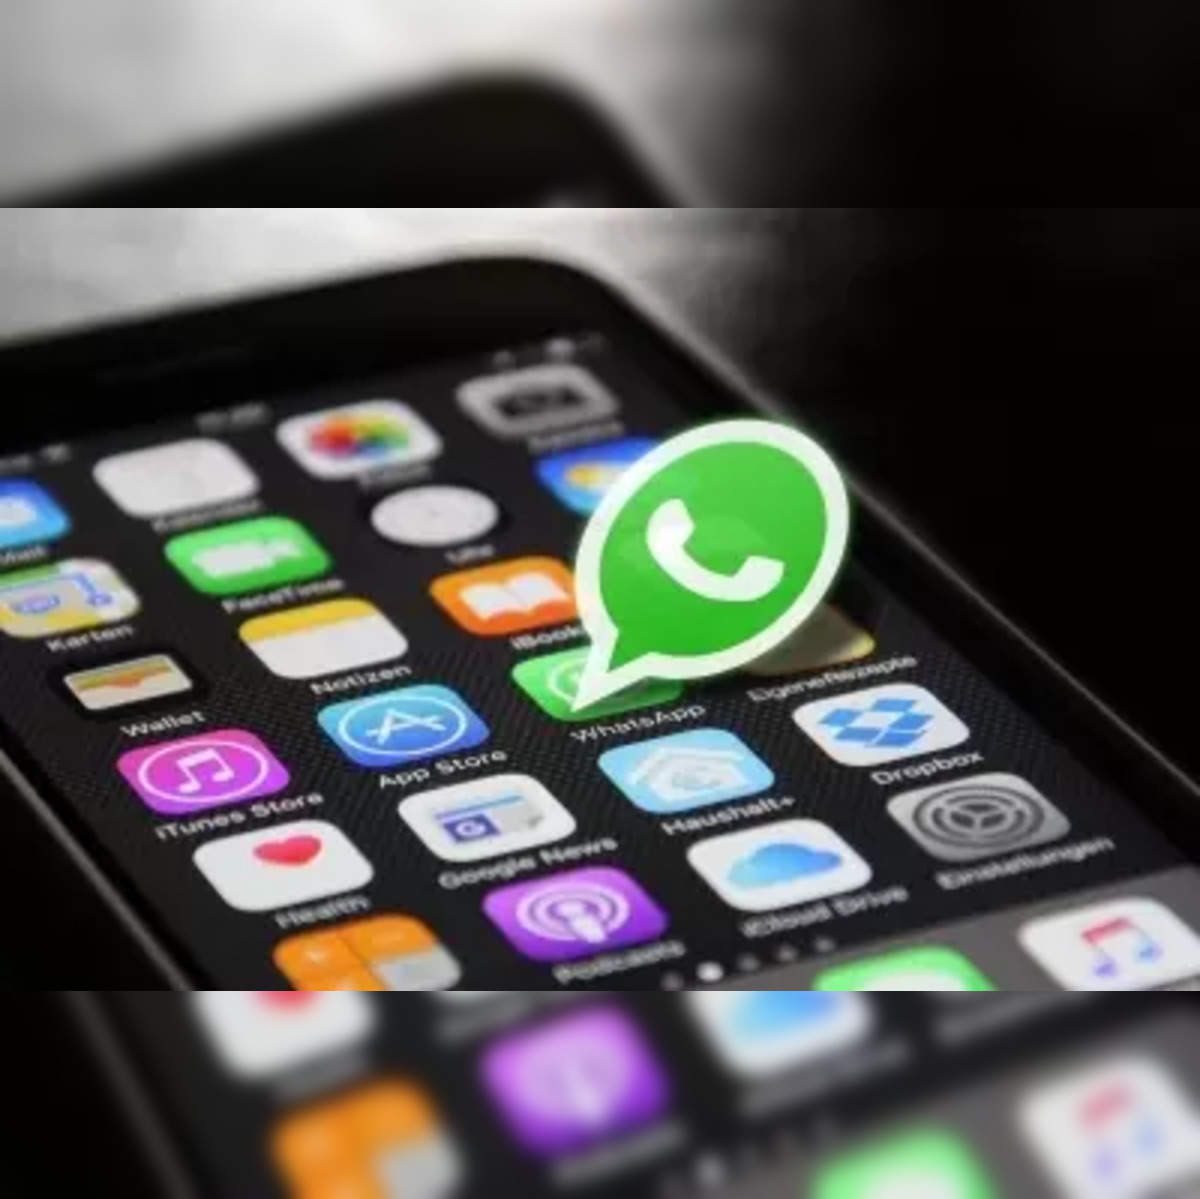 How to Change WhatsApp Profile Picture? - virtual user